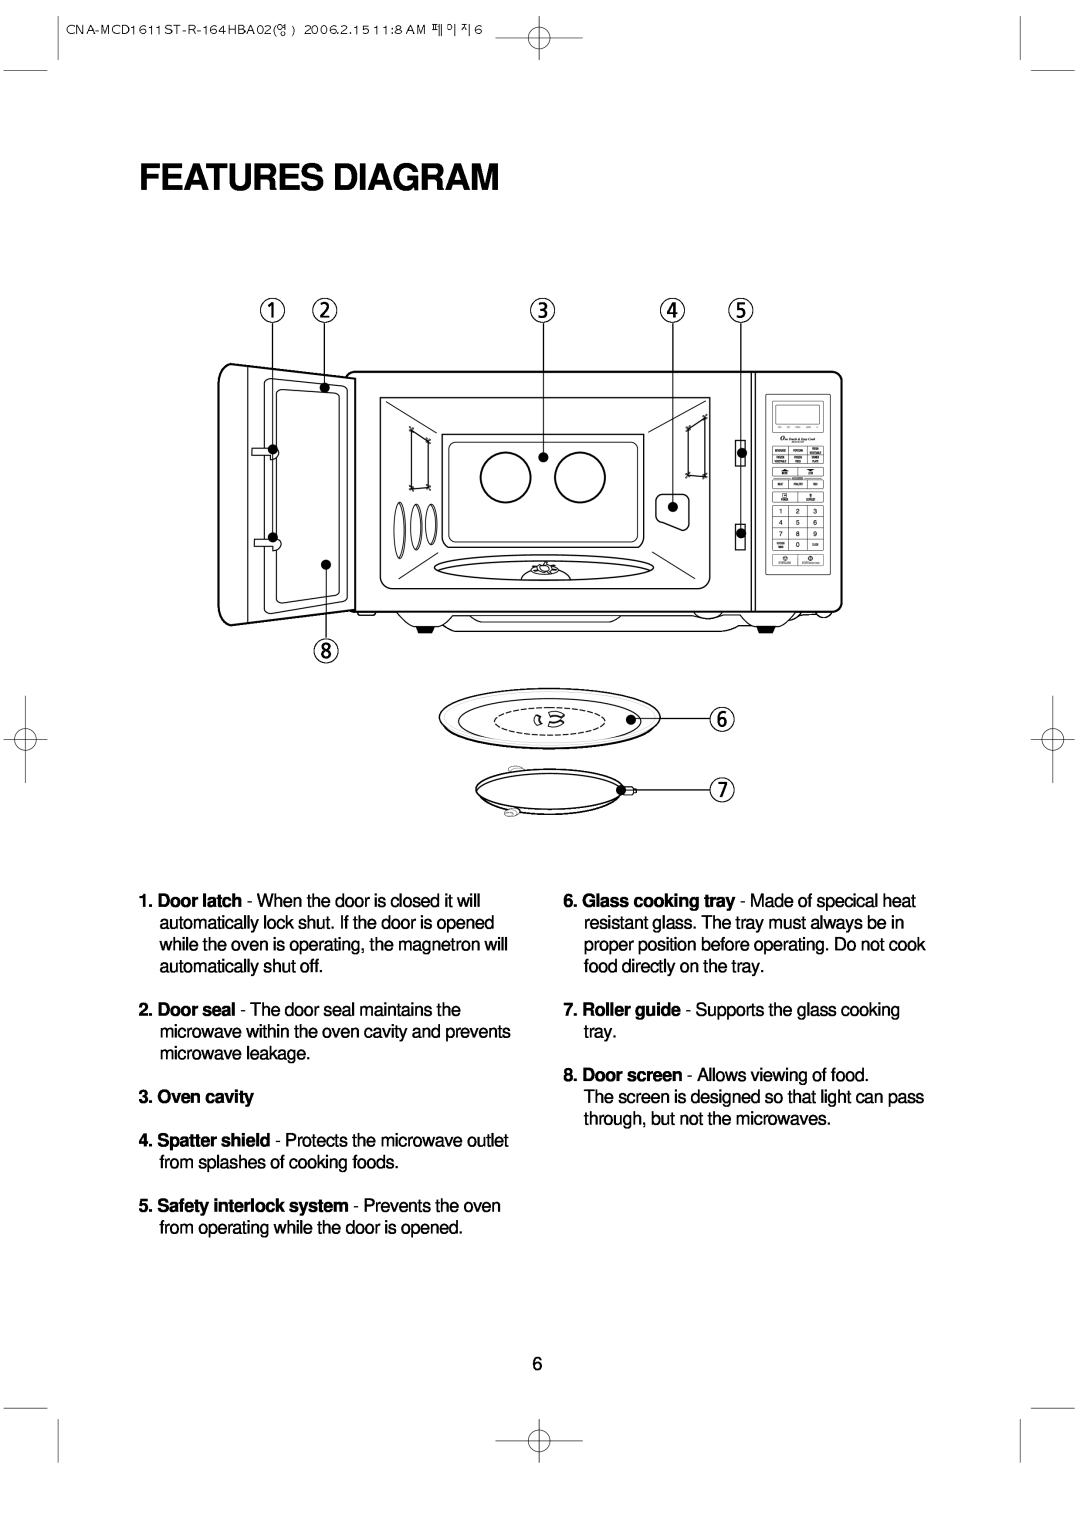 Magic Chef MCD1611ST manual Features Diagram, Oven cavity 